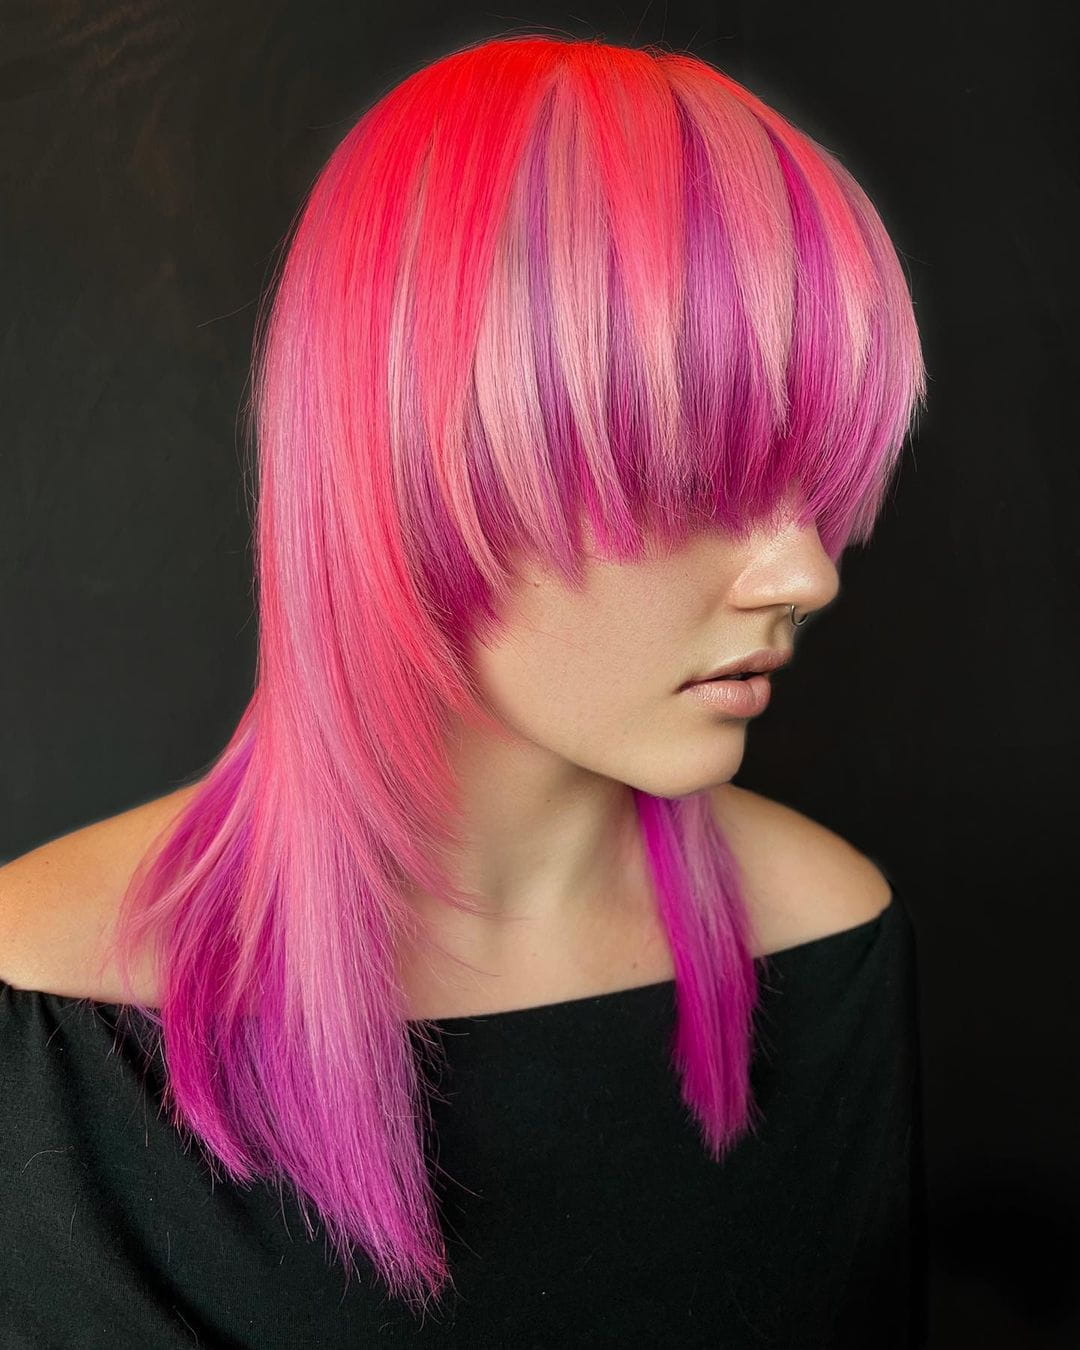 100+ Best Colorful Hair Ideas images 65